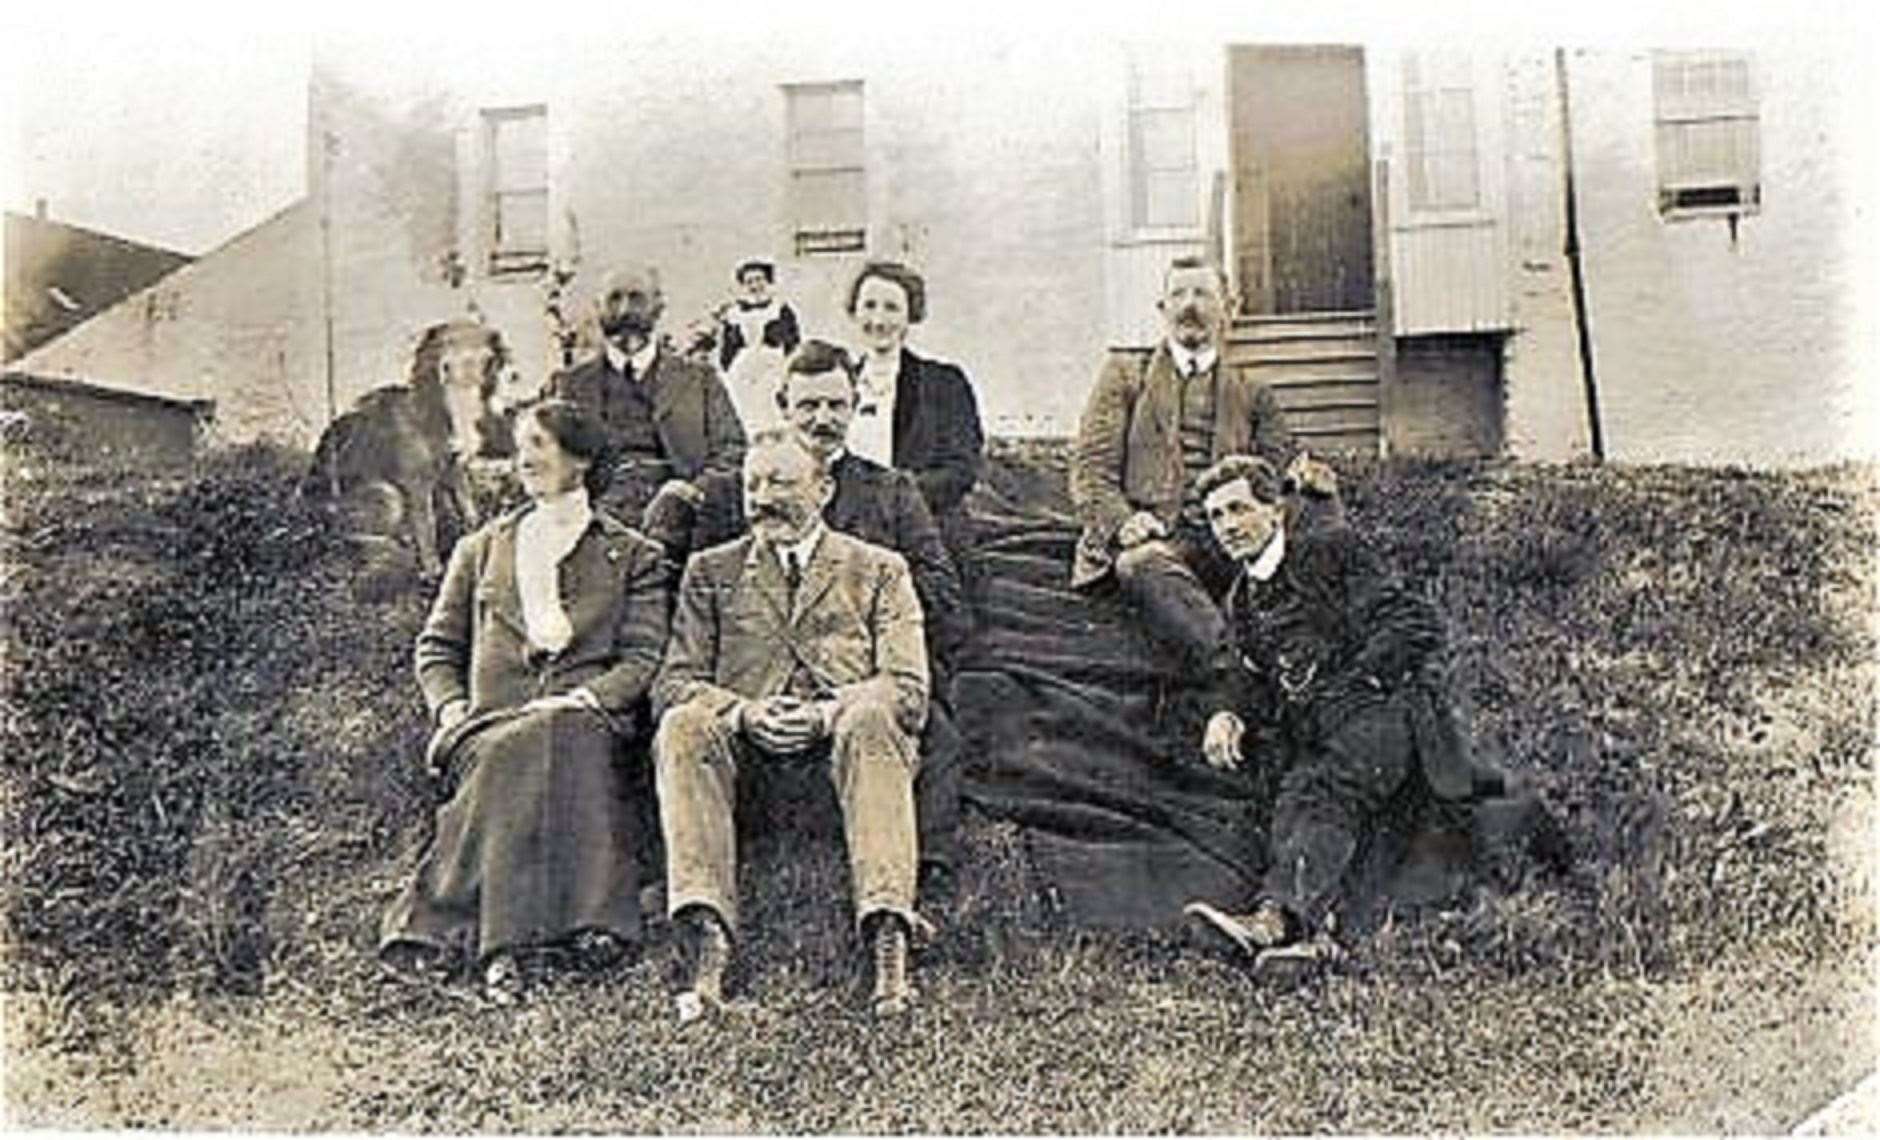 A portrait of the Begg family who lived at Brims Castle after its restoration in 1910.